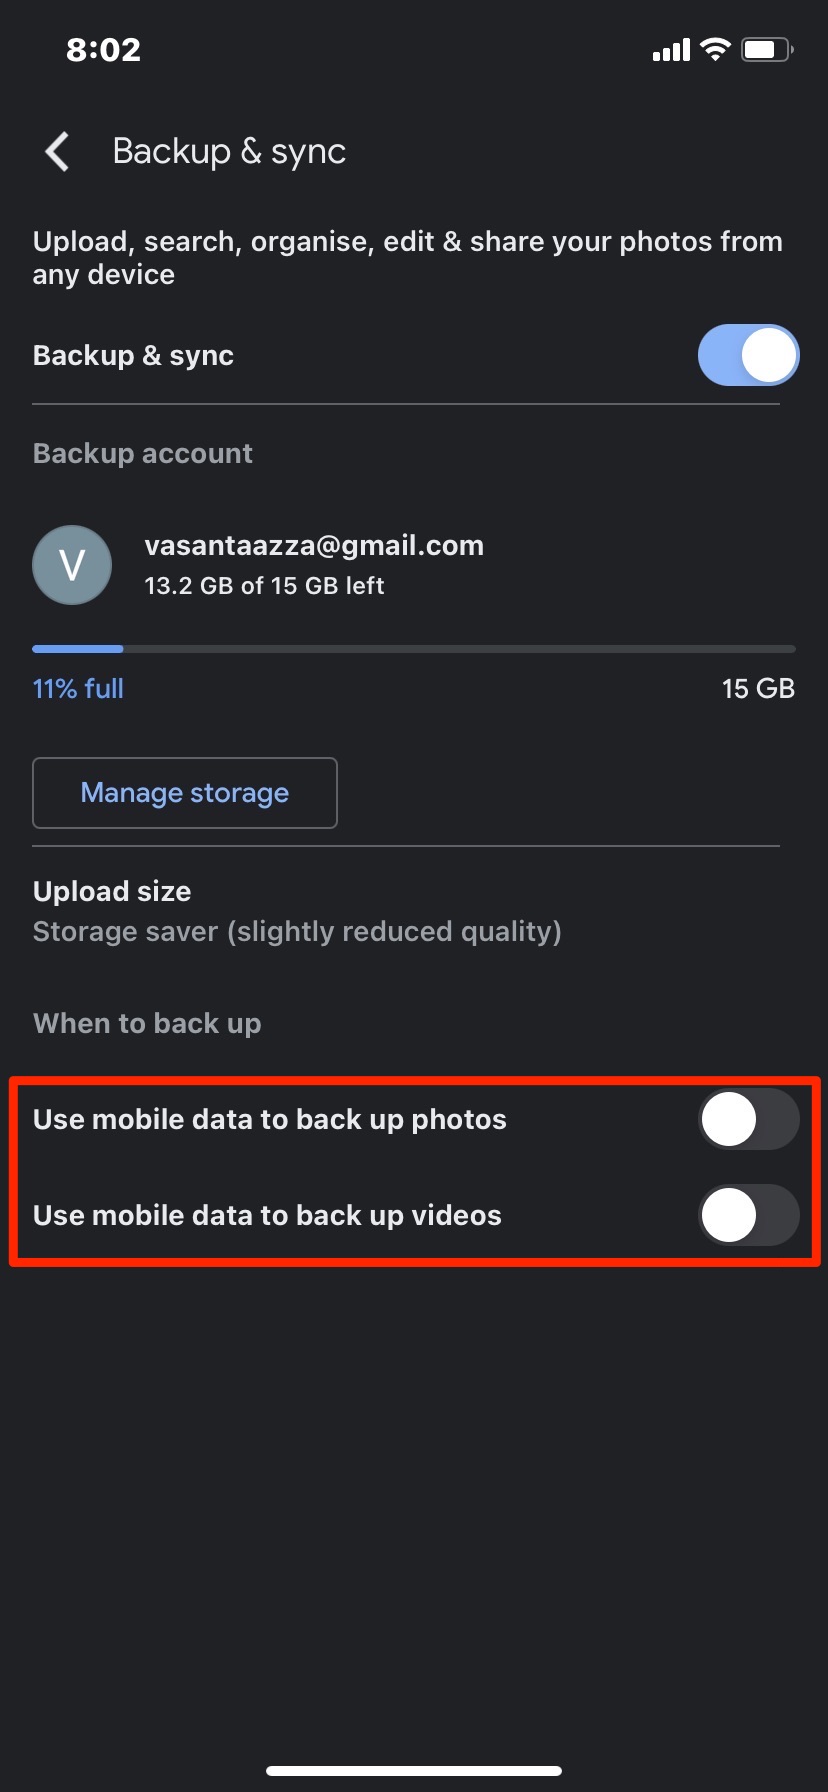 Use Mobile Data to Backup Videos